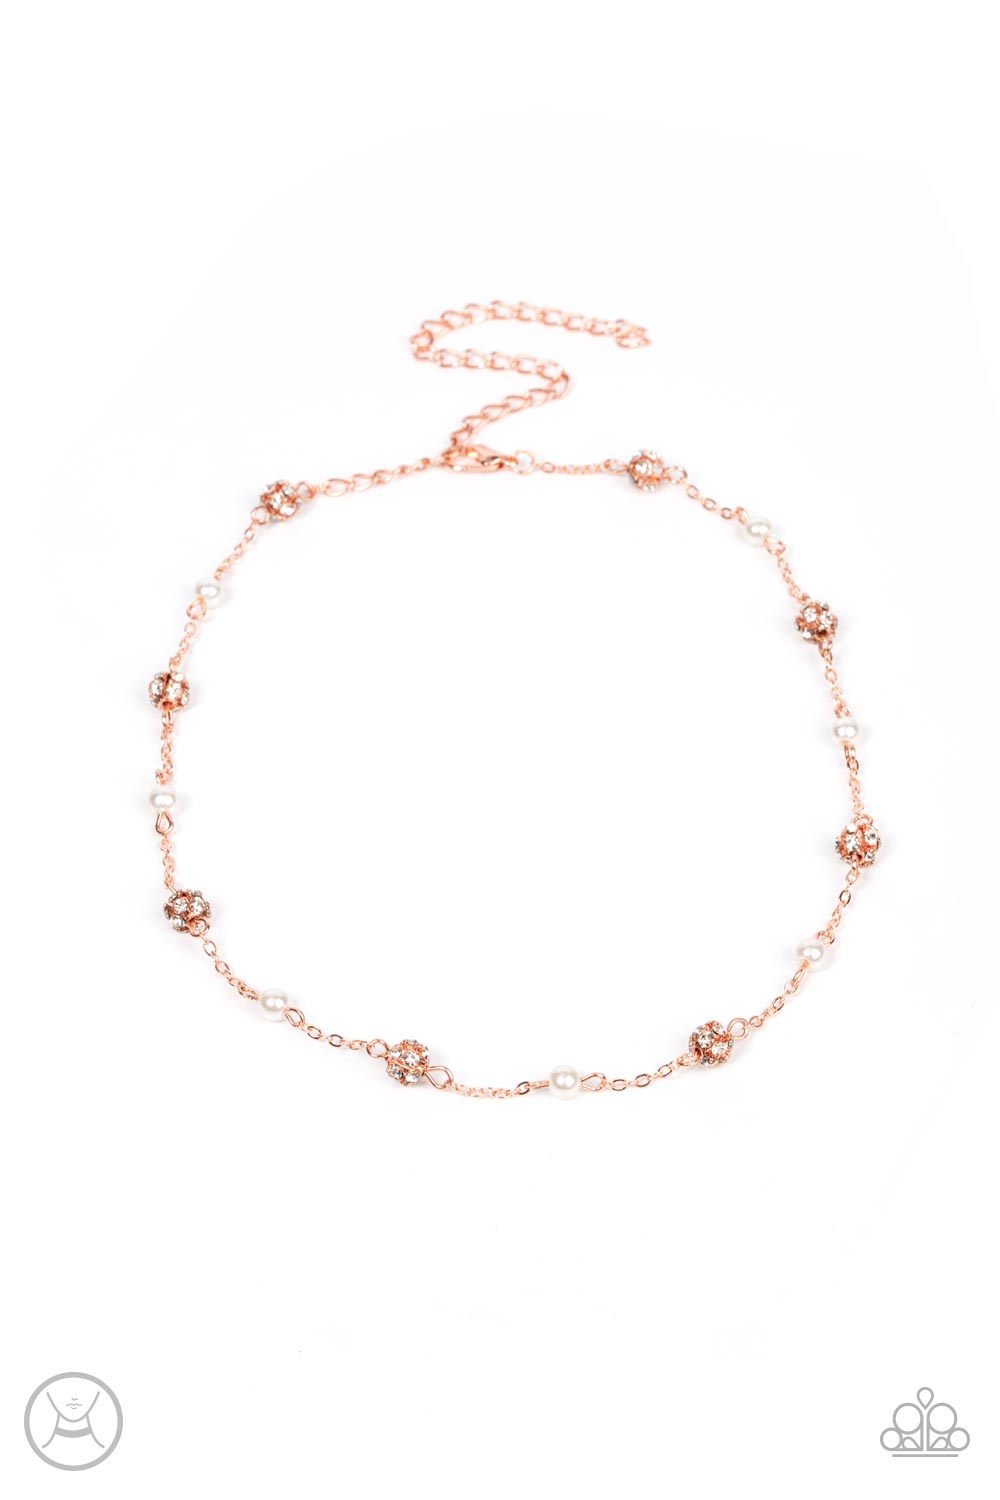 Rumored Romance Paparazzi Accessories Choker with Earrings Copper